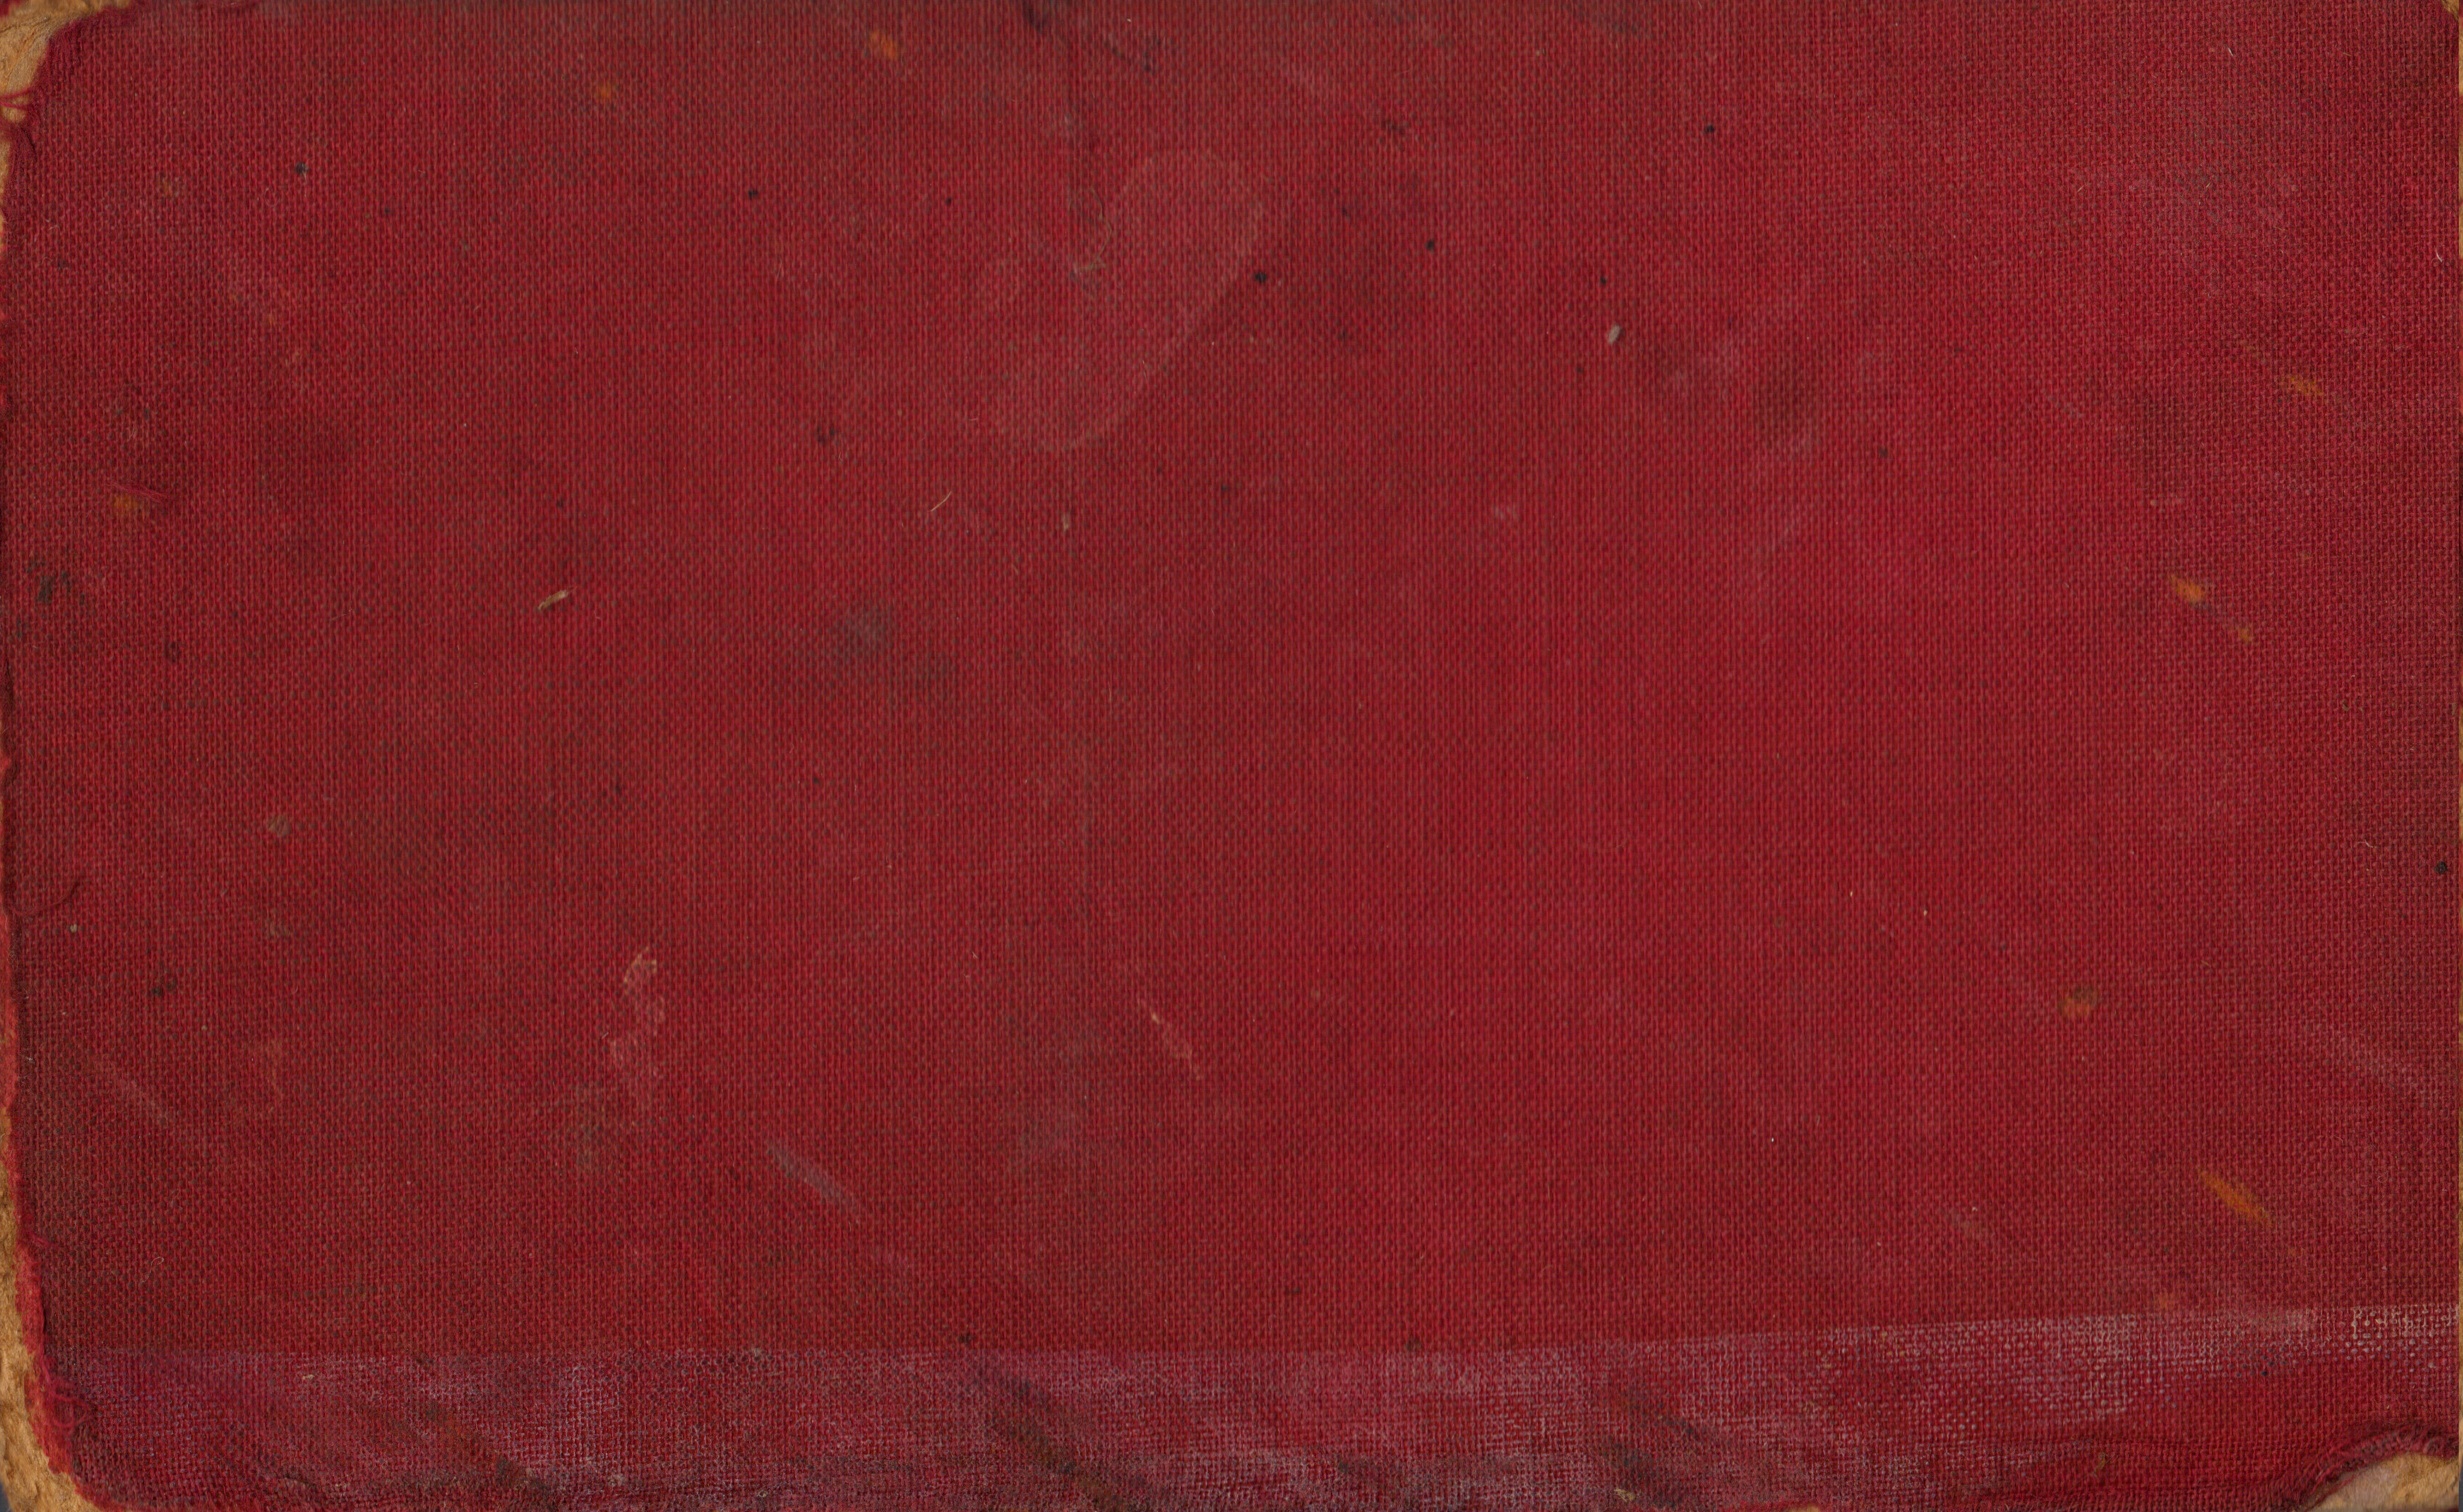 Dirty Red Fabric Texture (JPG) | OnlyGFX.com